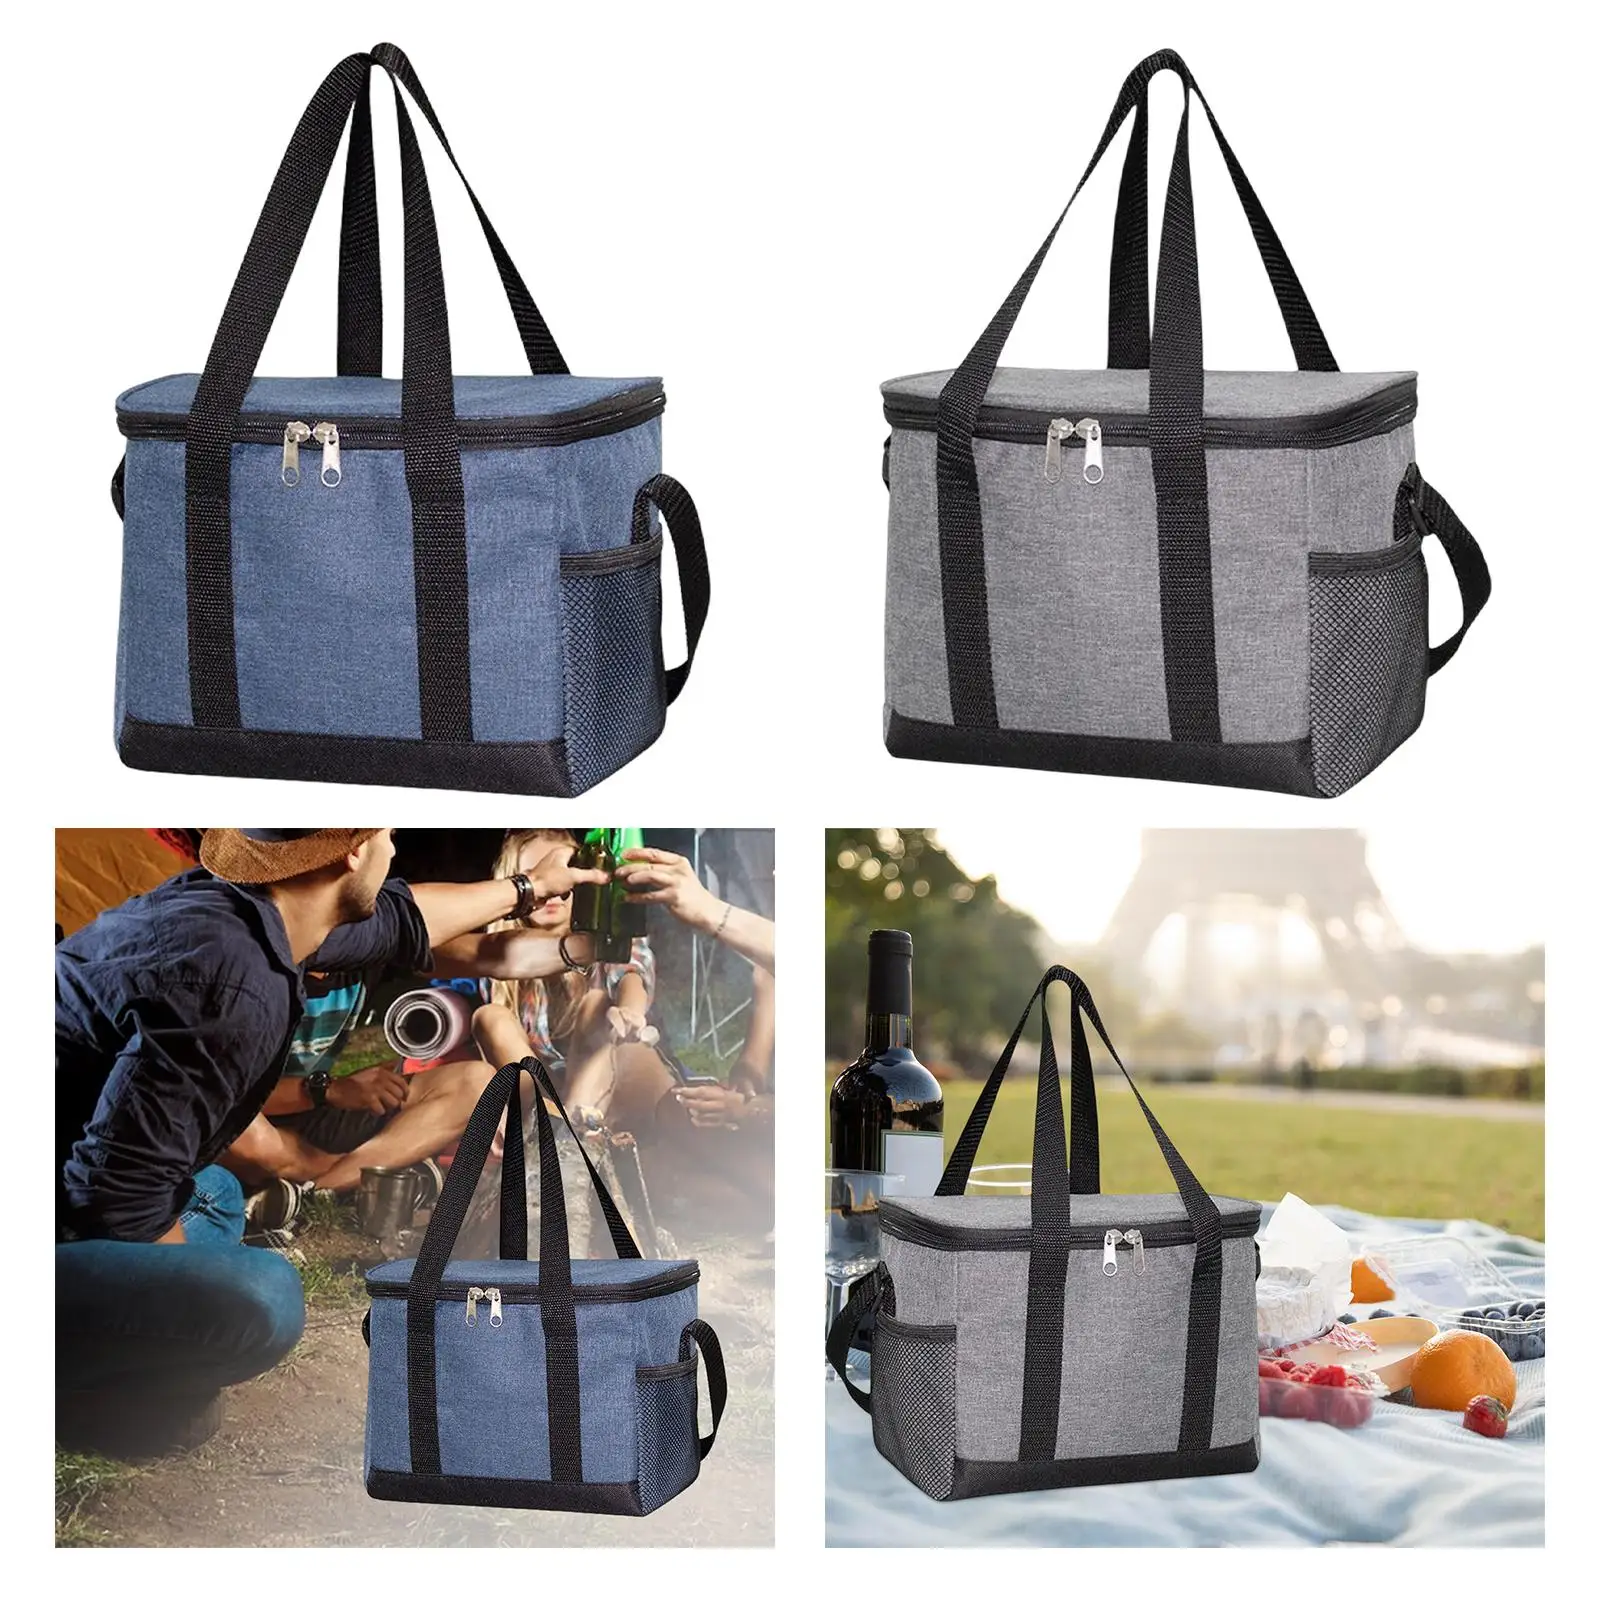 Insulated Lunch Shopping Bag Waterproof Reusable Outdoor Portable for Picnic